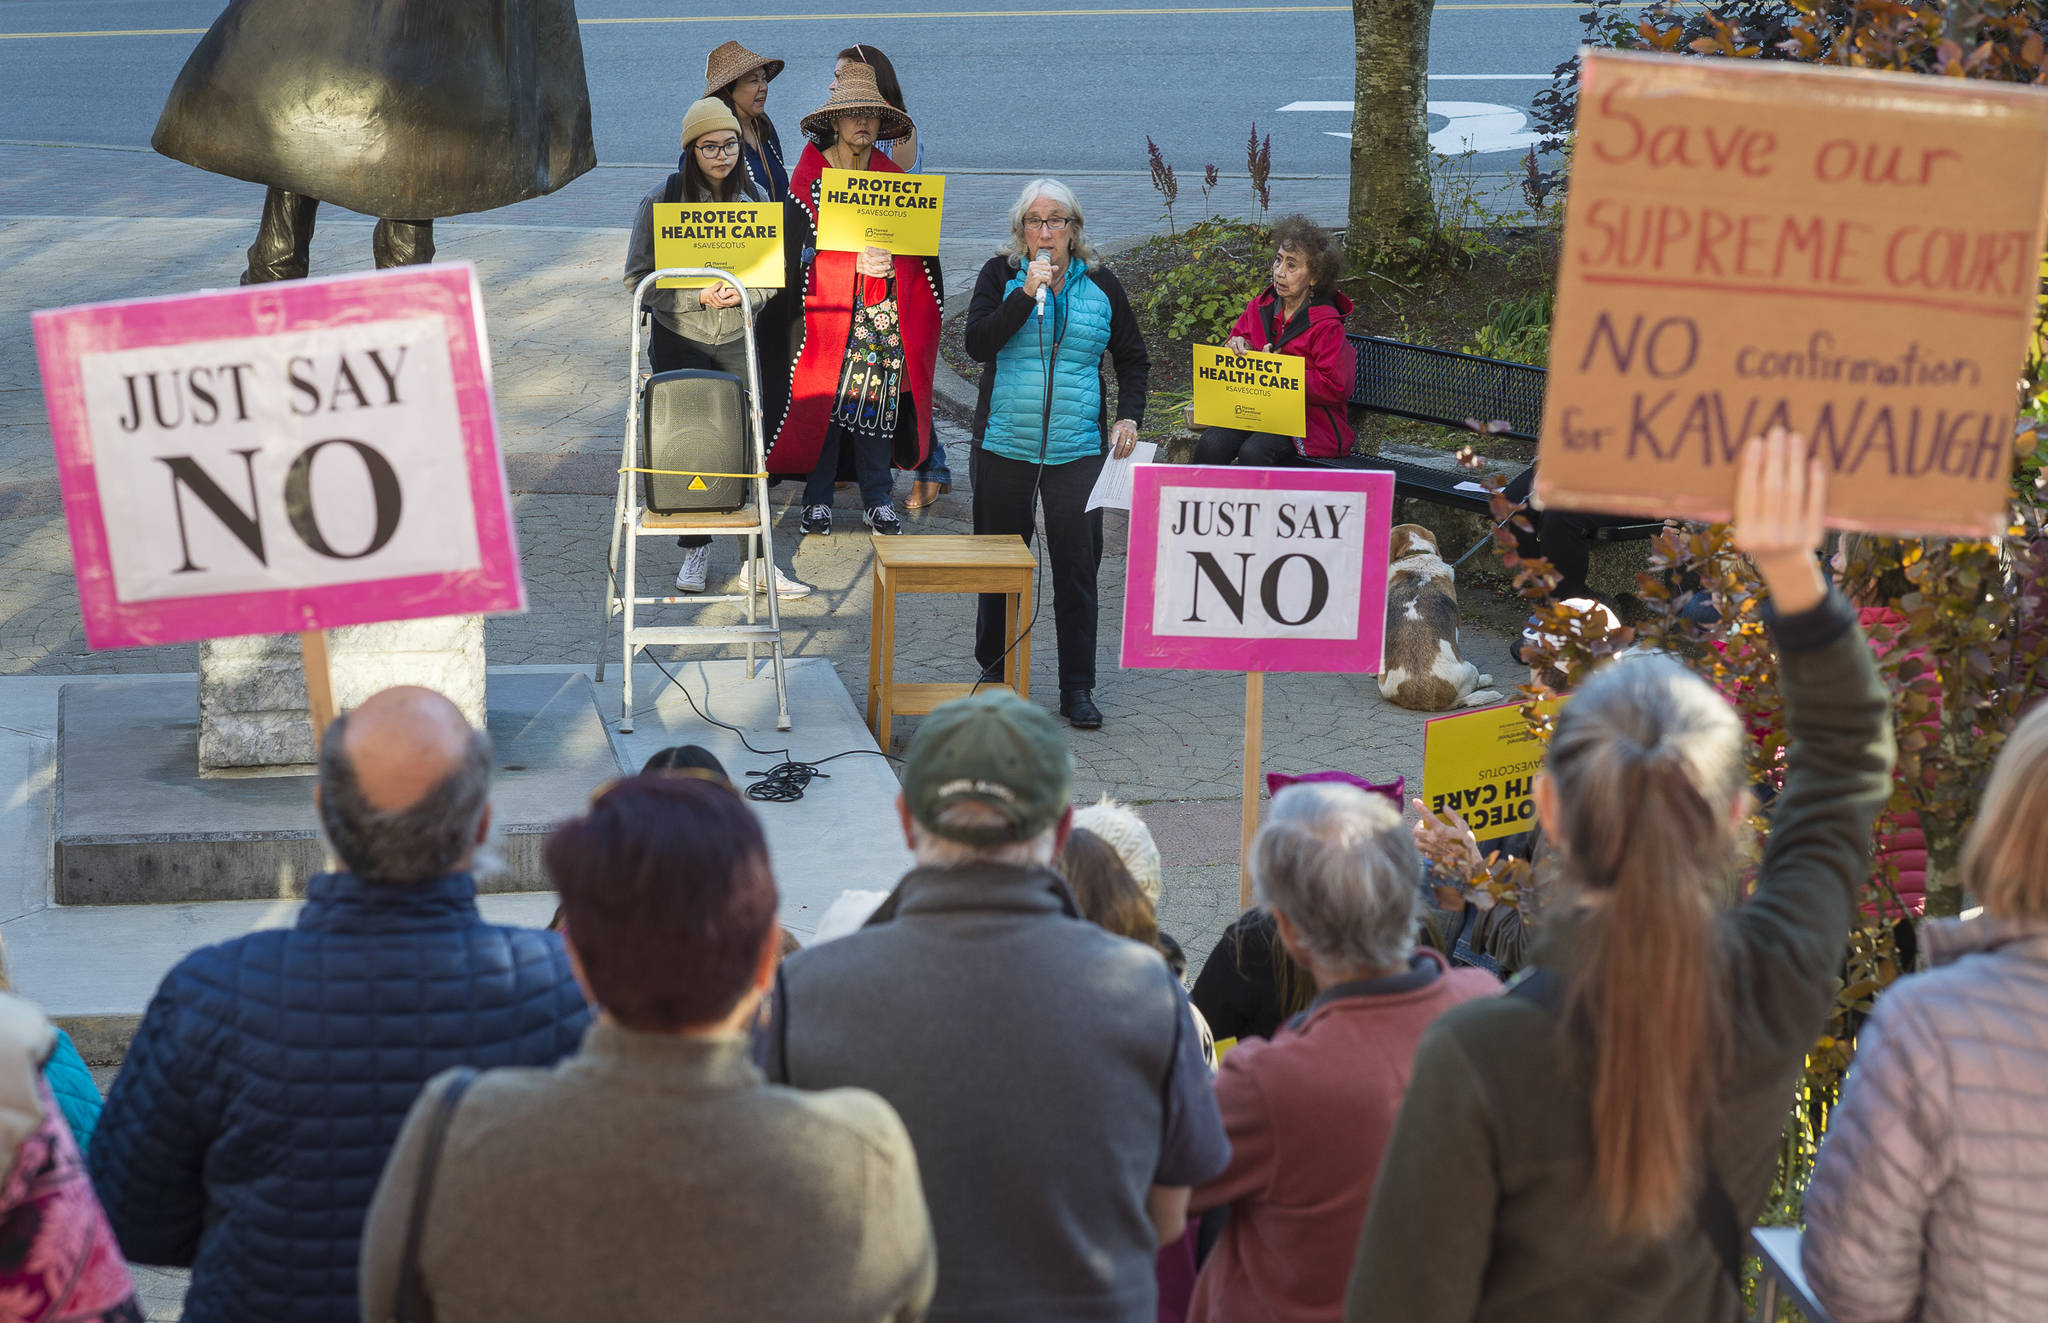 Juneau residents listen to Kate Troll as they participate in a protest against President Donald Trump’s nominee to the Supreme Court, Brett Kavanaugh, at Dimond Courthouse Plaza on Tuesday, Sept. 18, 2018. (Michael Penn | Juneau Empire)